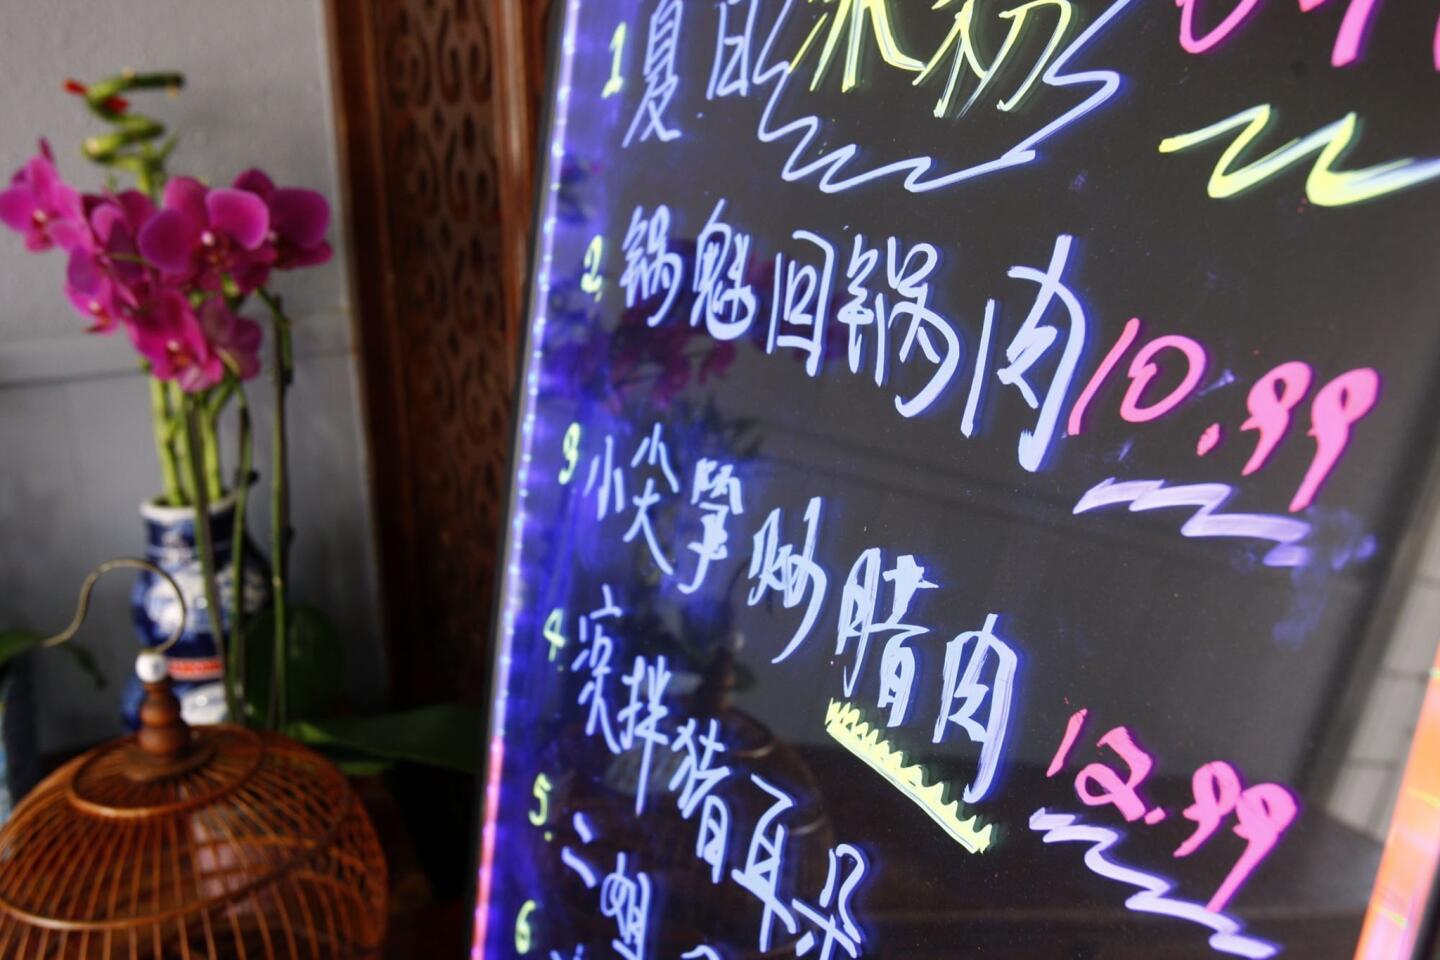 Daily delicacies are listed on a board at the entrance to Chengdu Taste in Alhambra.